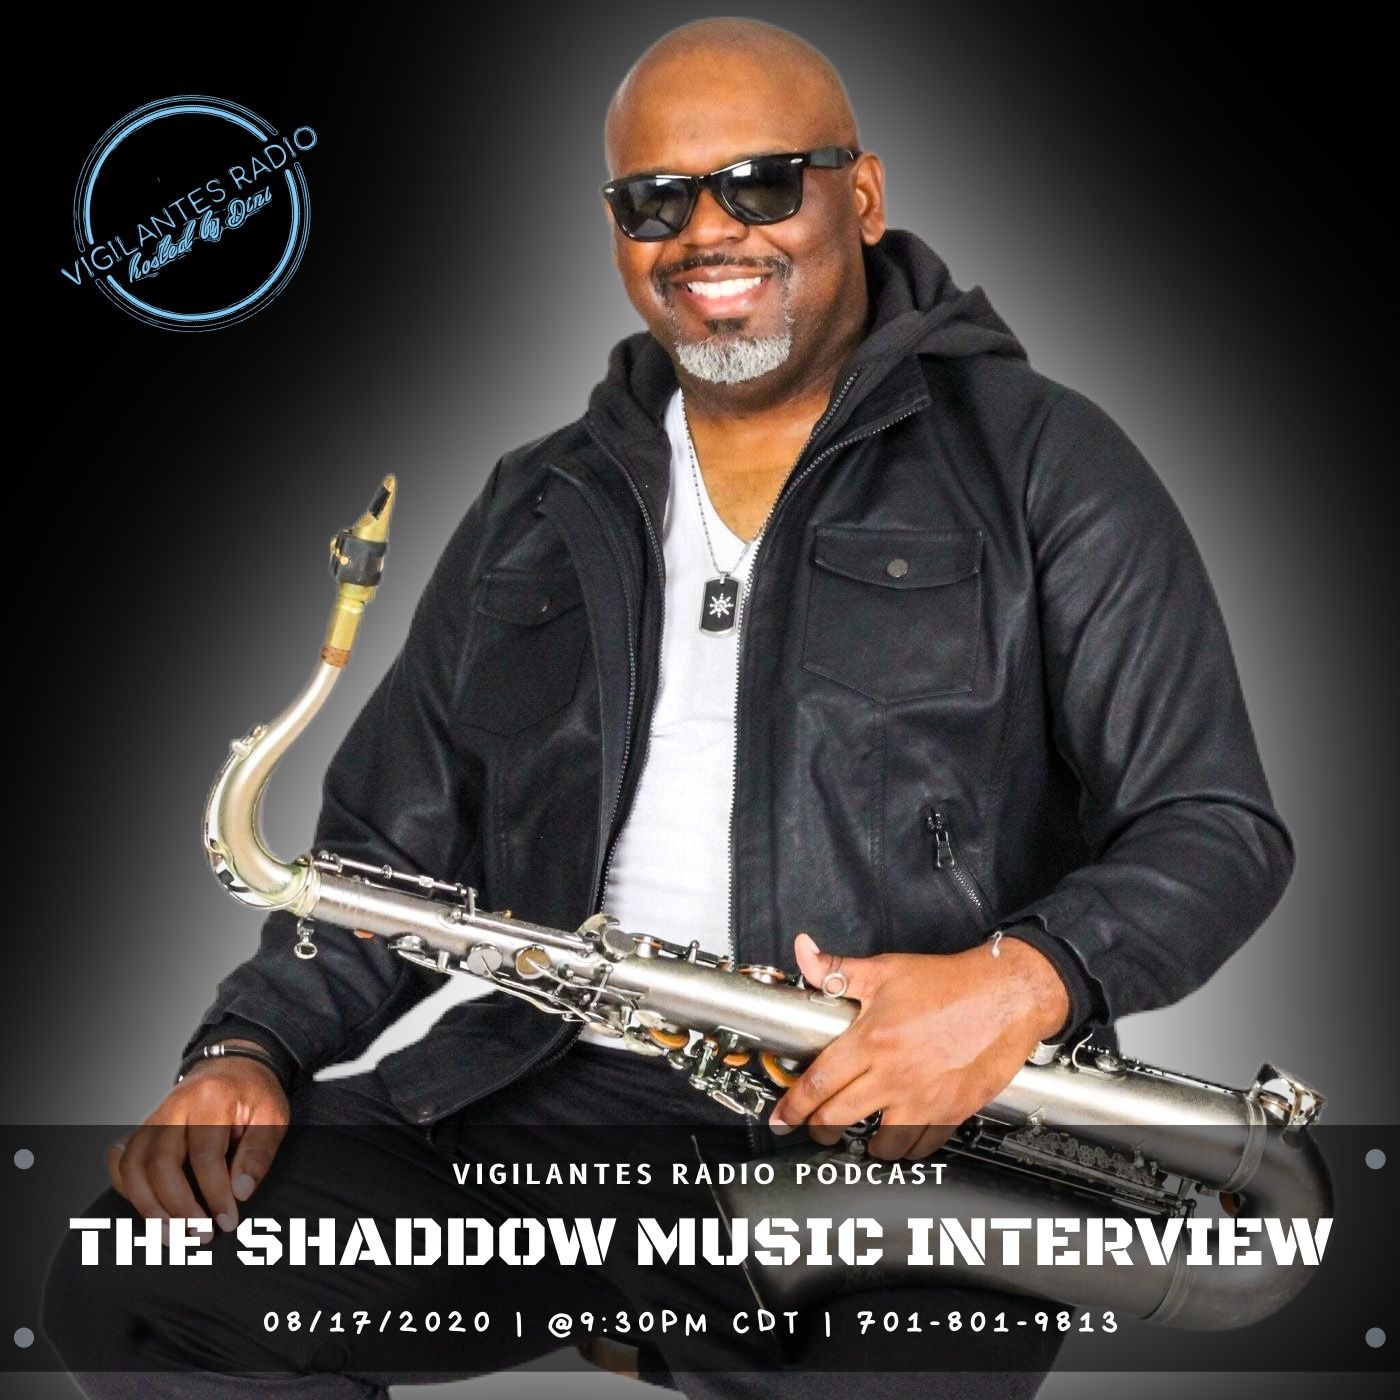 The Shaddow Music Interview. Image